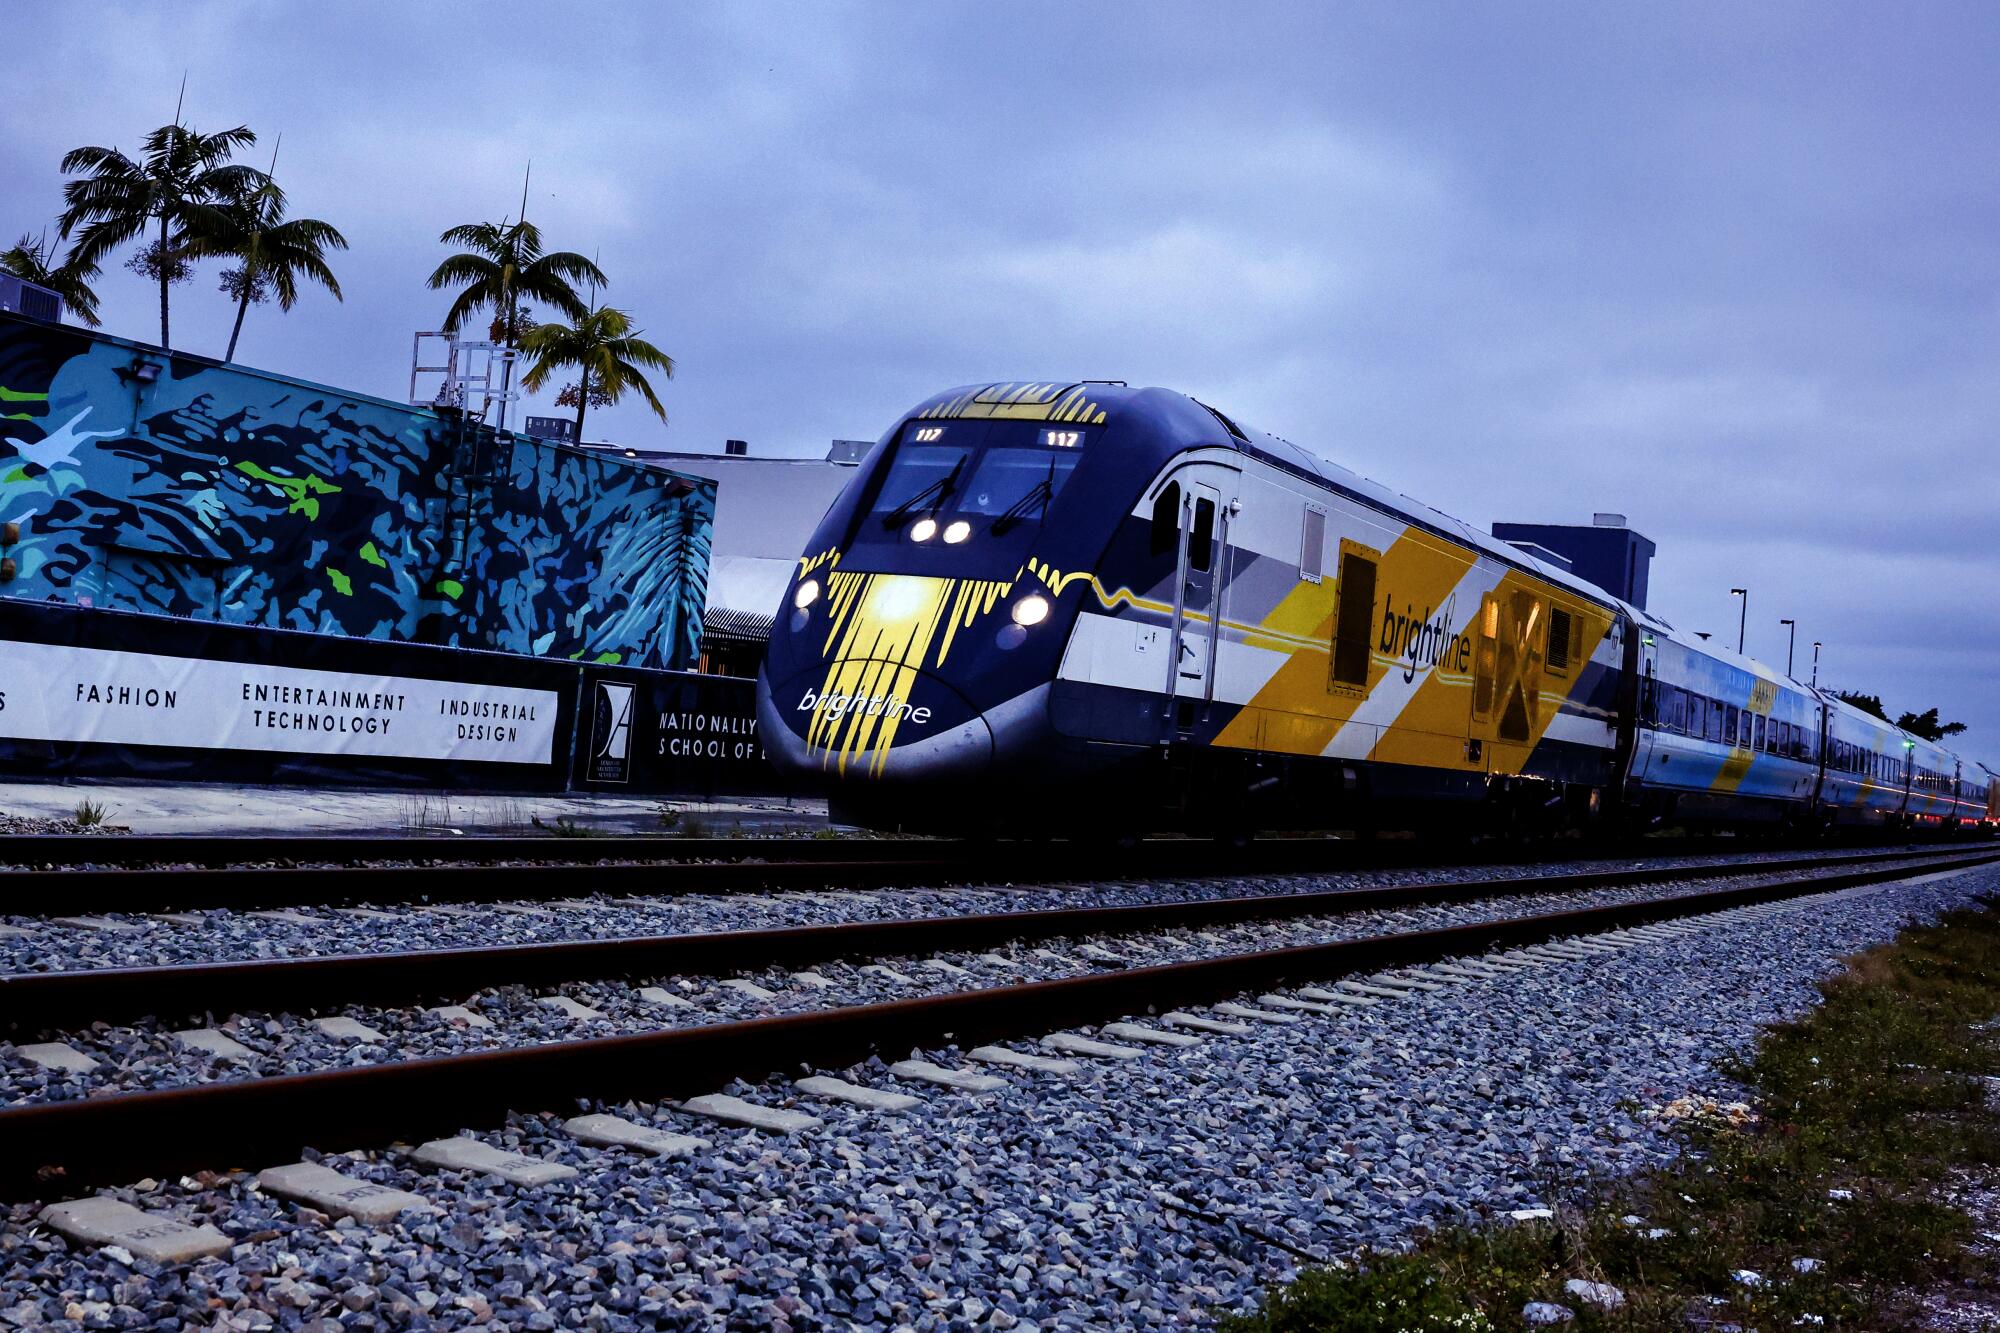 A blue-and-yellow train on railway tracks, with palm trees on the left